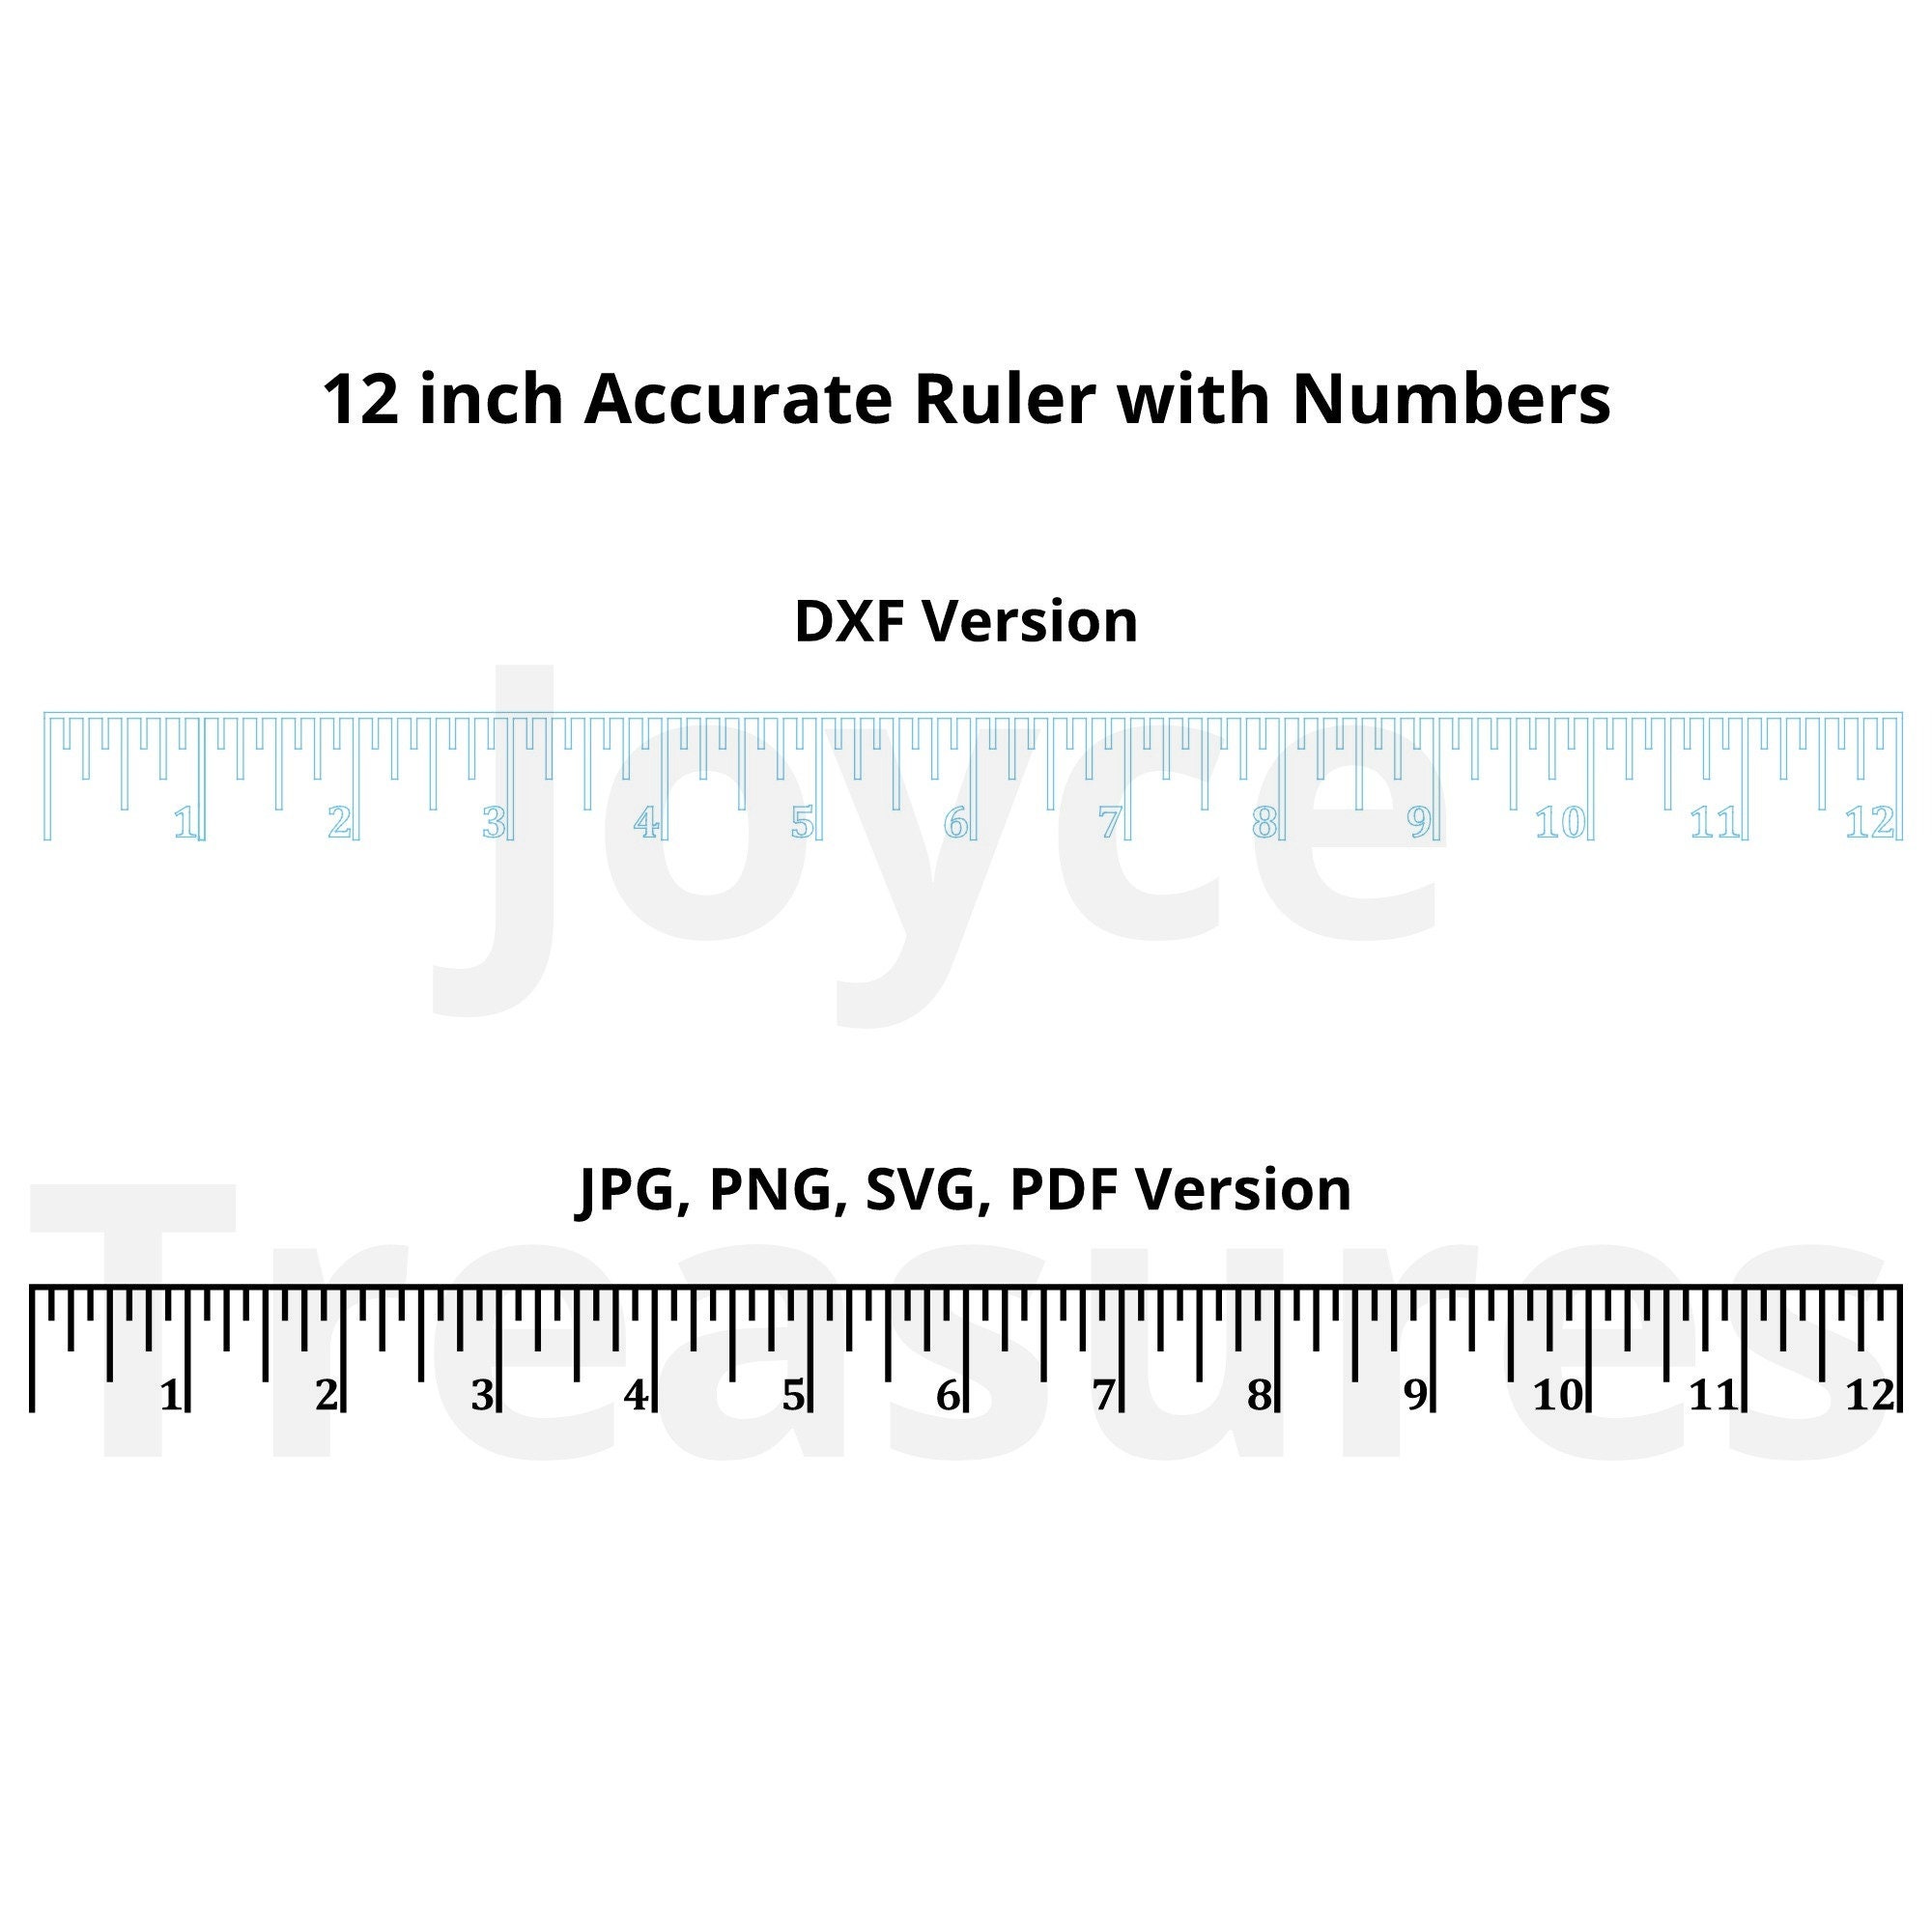 12 in Accurate Ruler With Numbers Lines Down DXF, Jpg, Png, SVG